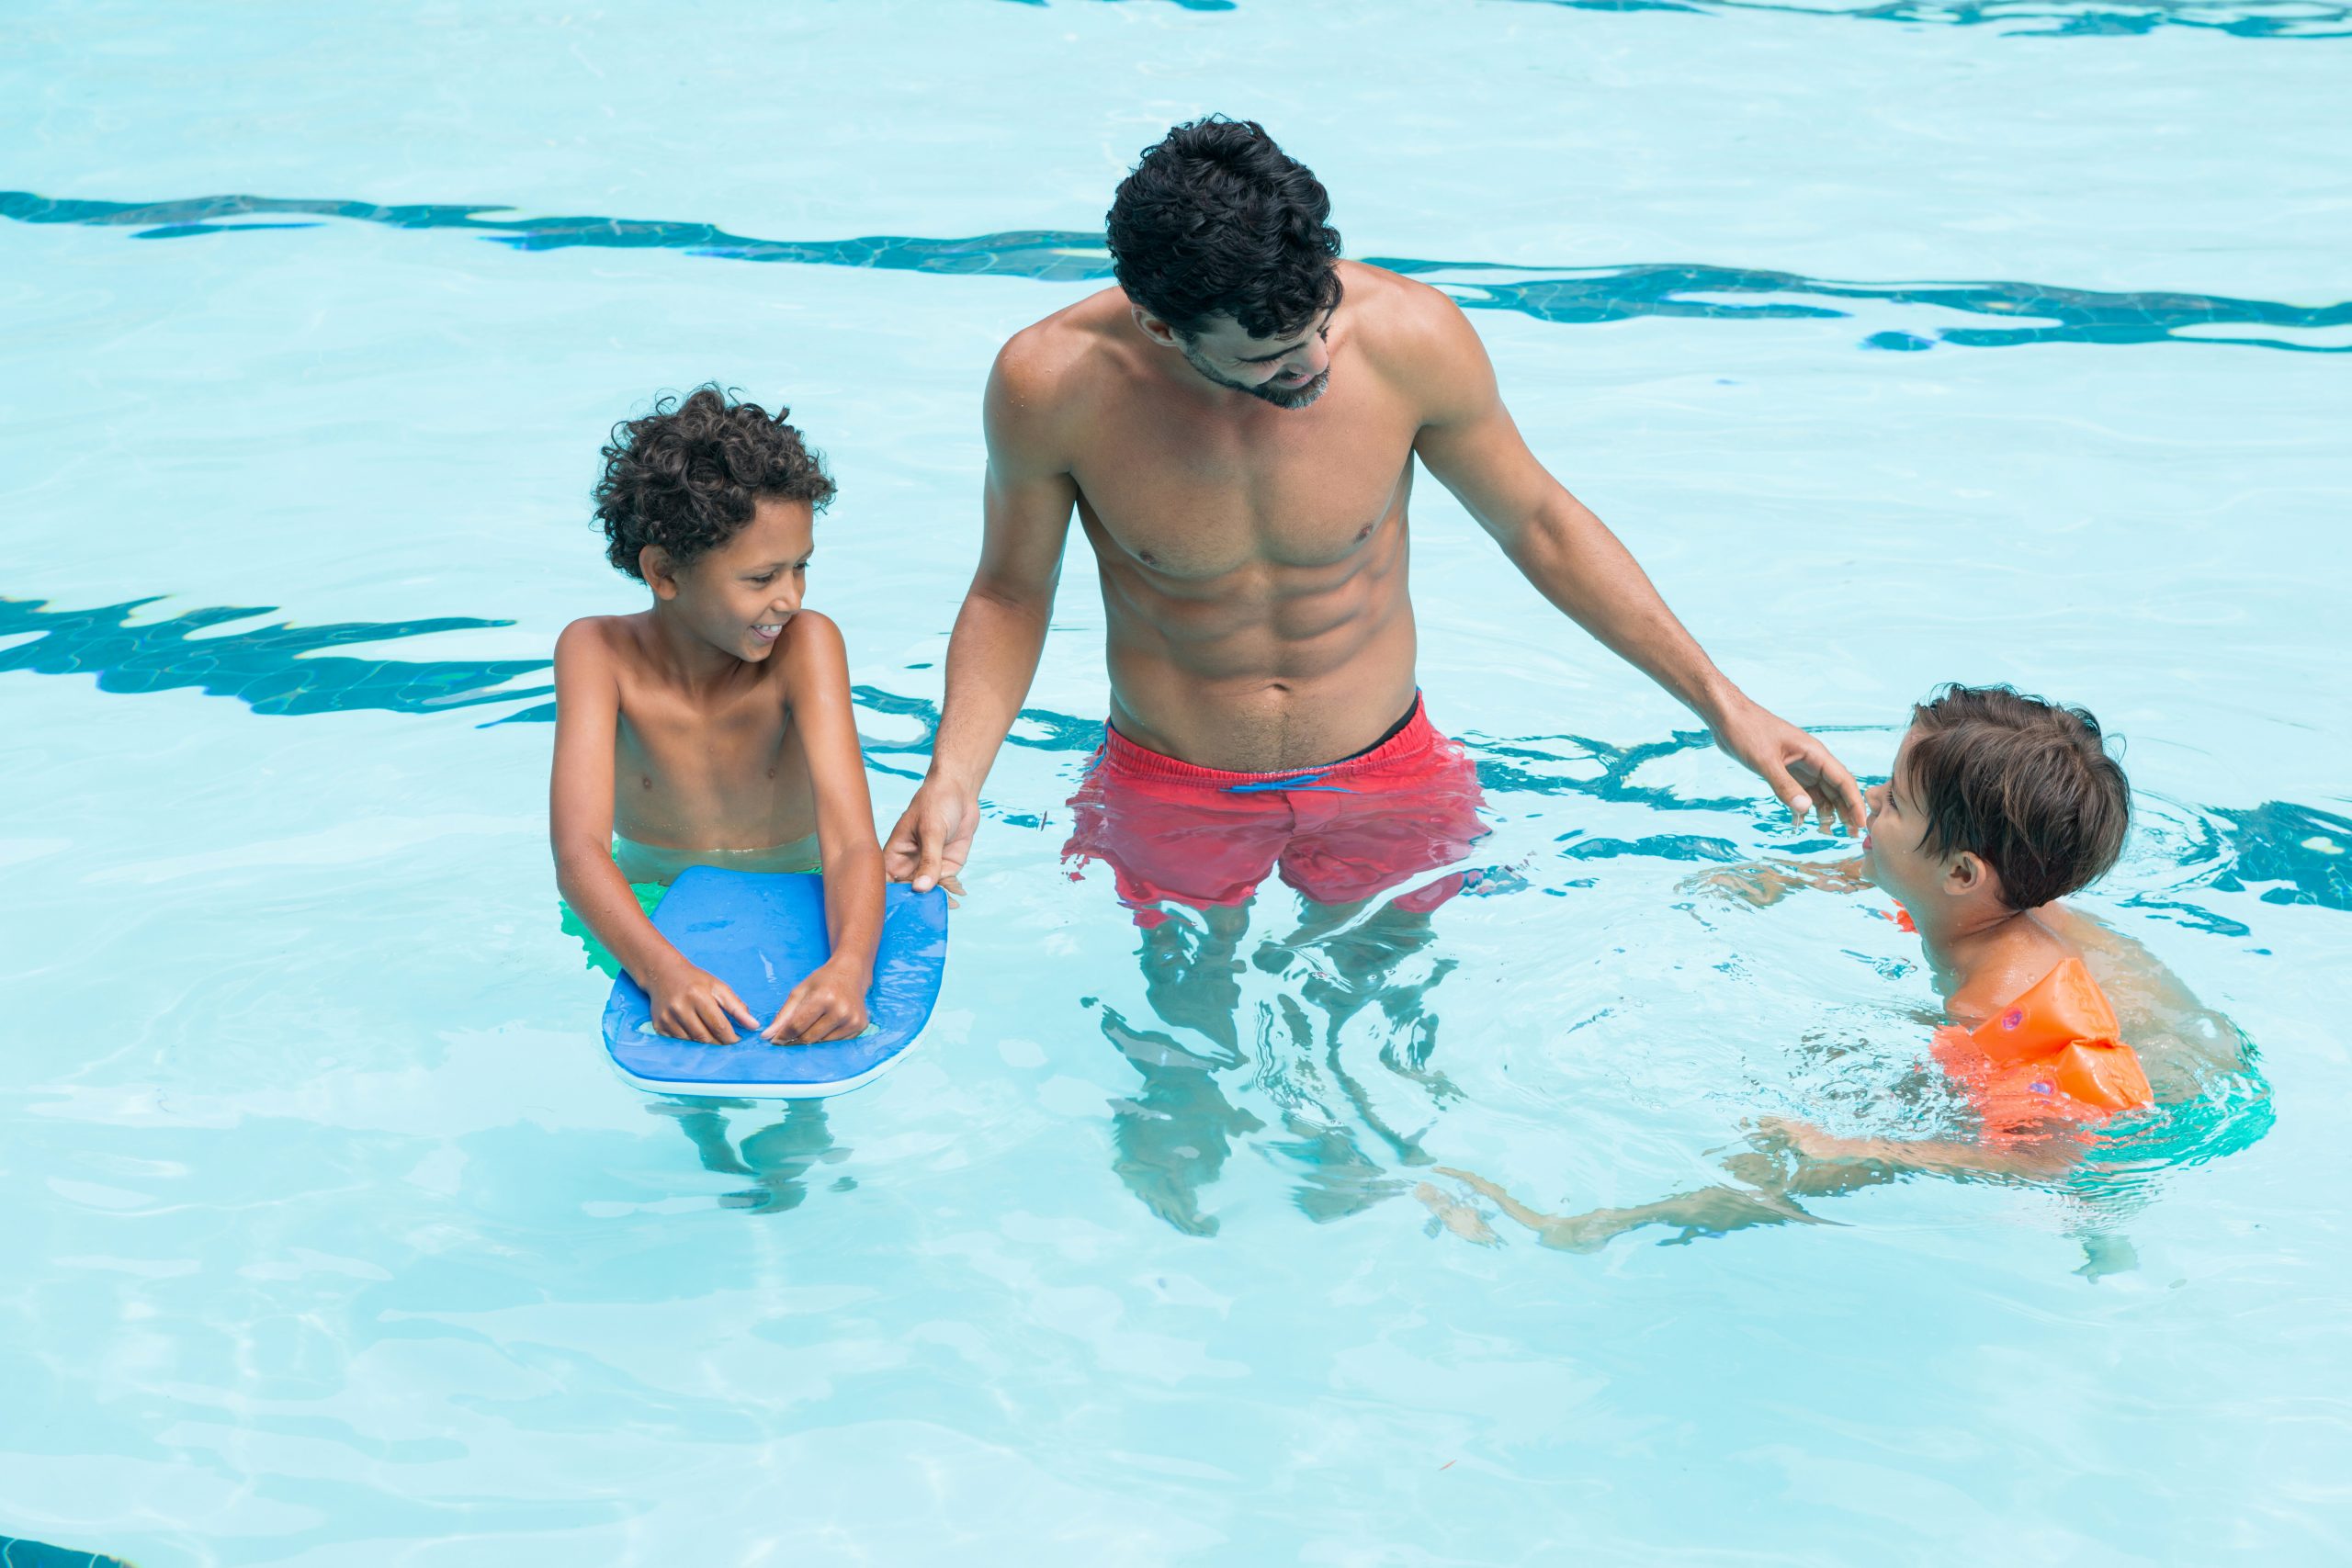  Ways to Make Your Pool Safer